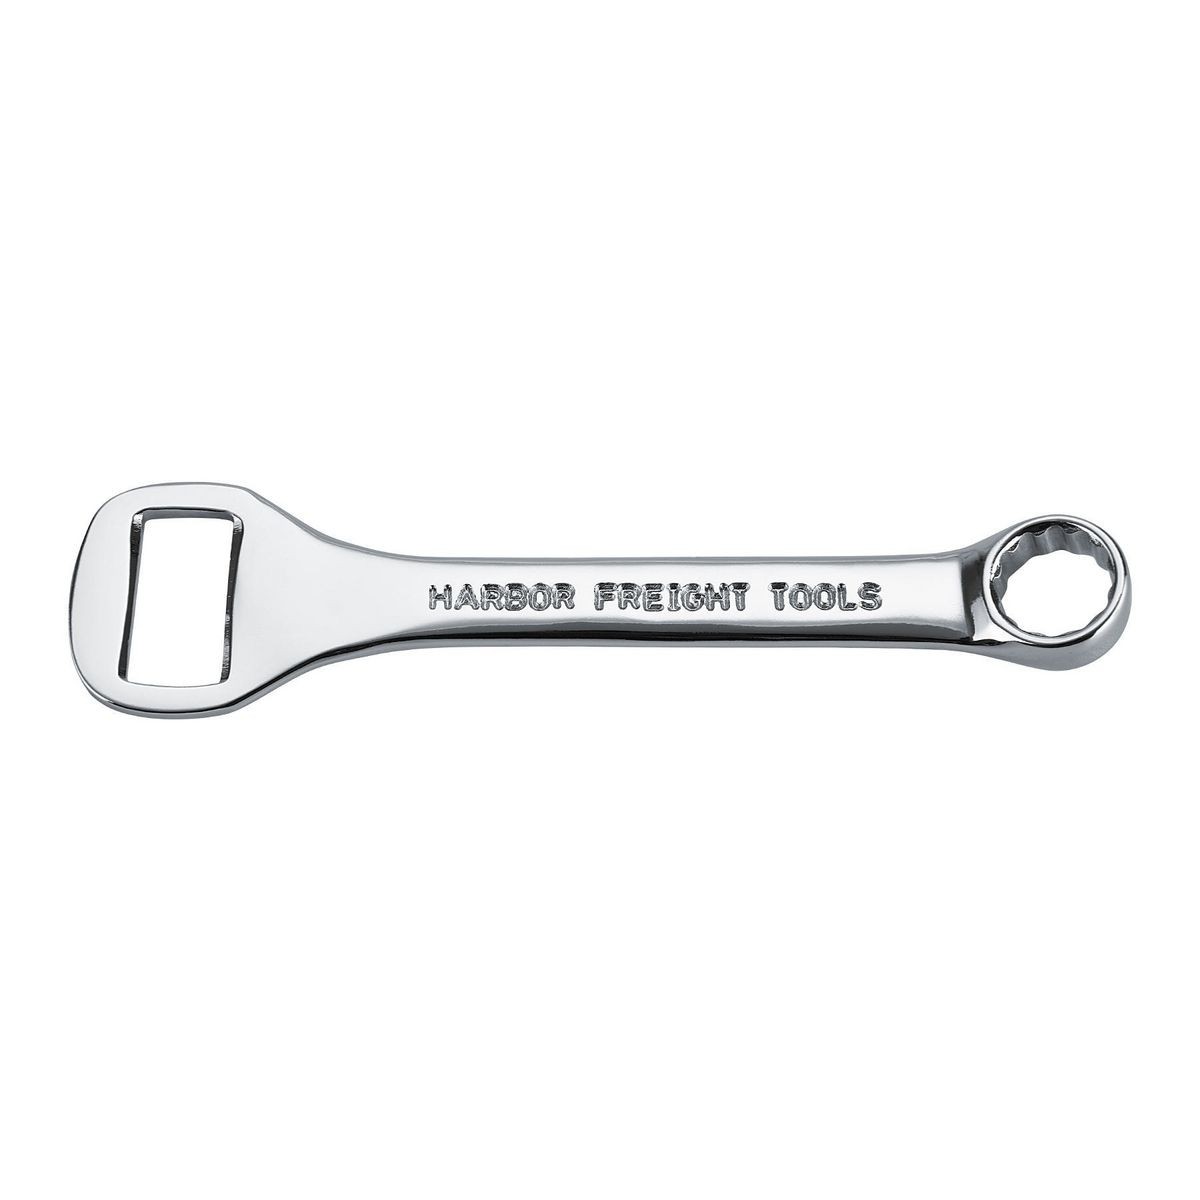 PITTSBURGH 5/8 In. Wrench Bottle Opener – Item 56771